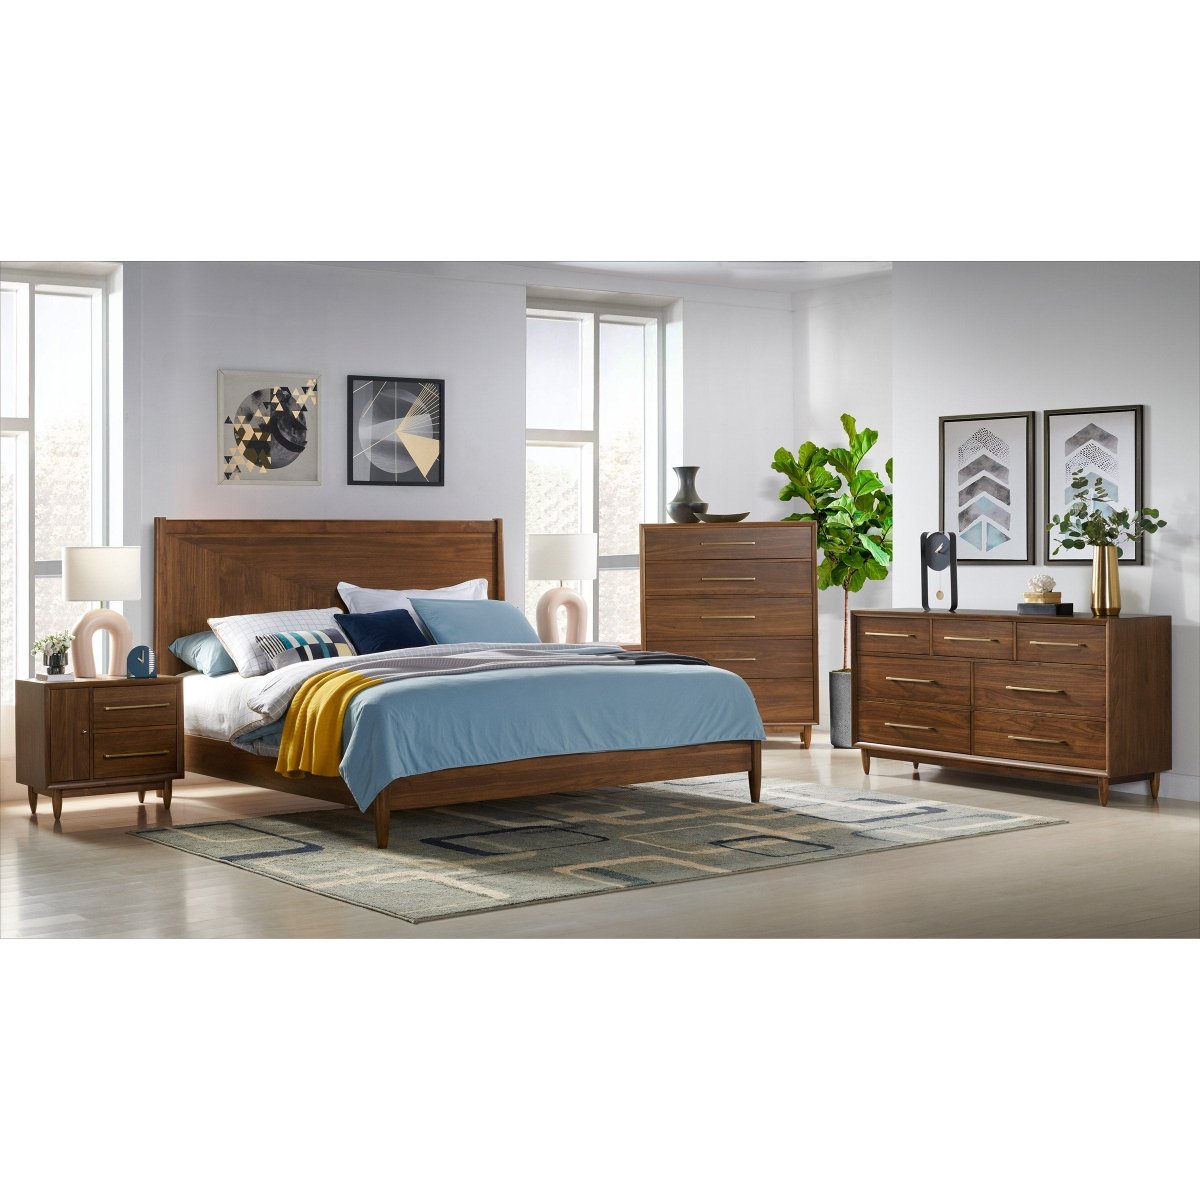 Marina Del Rey Nightstand with Power - Alpine Outlets